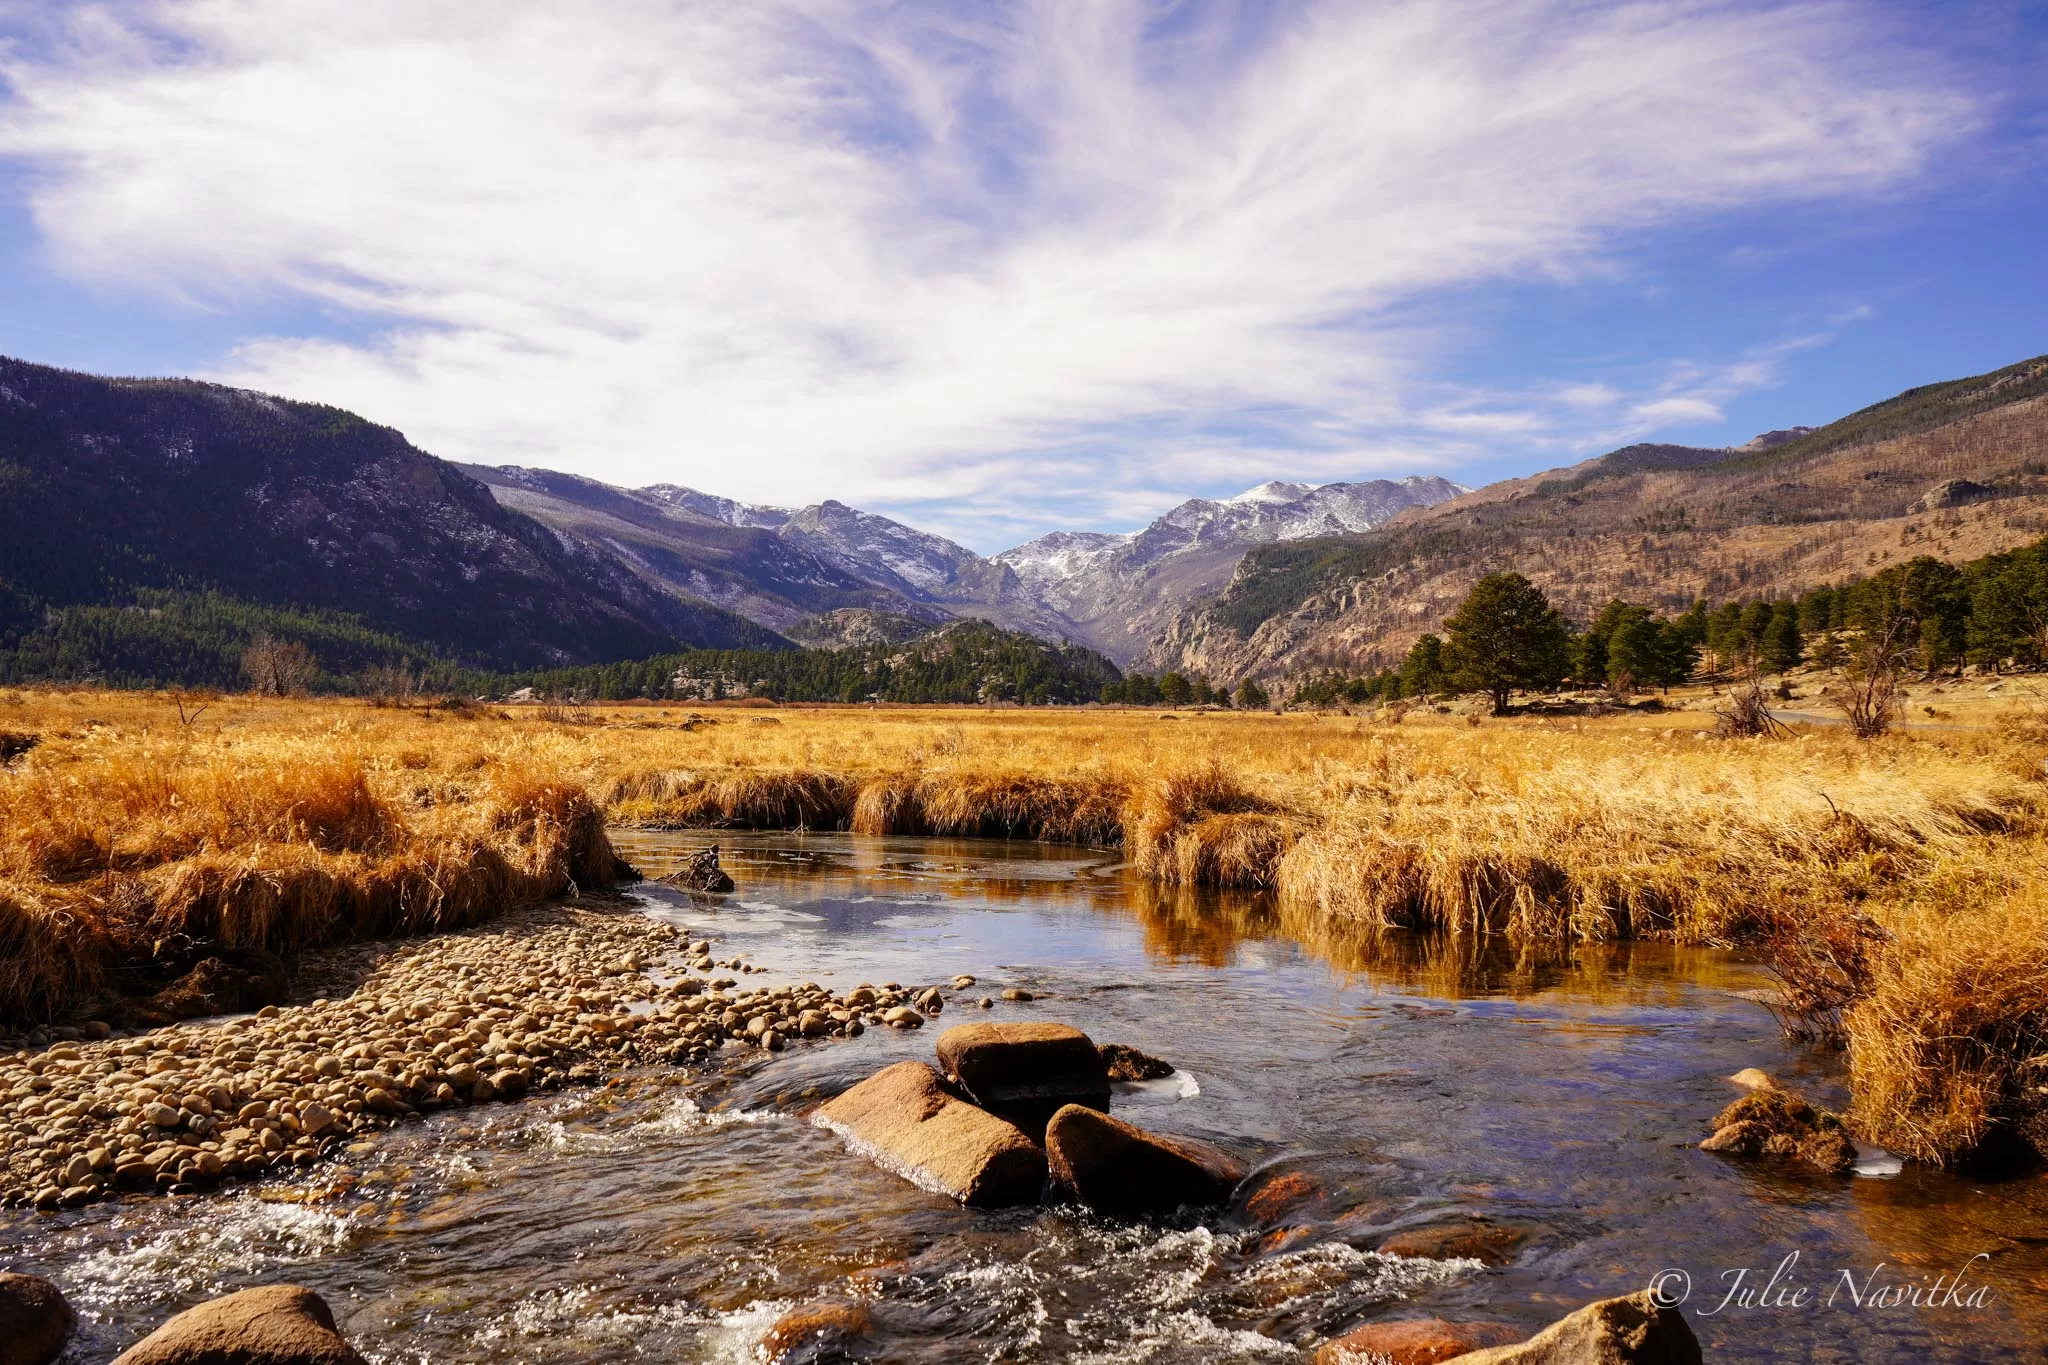 Image of a landscape with a river, meadow, and background mountains in Rocky Mountain National Park, Colorado